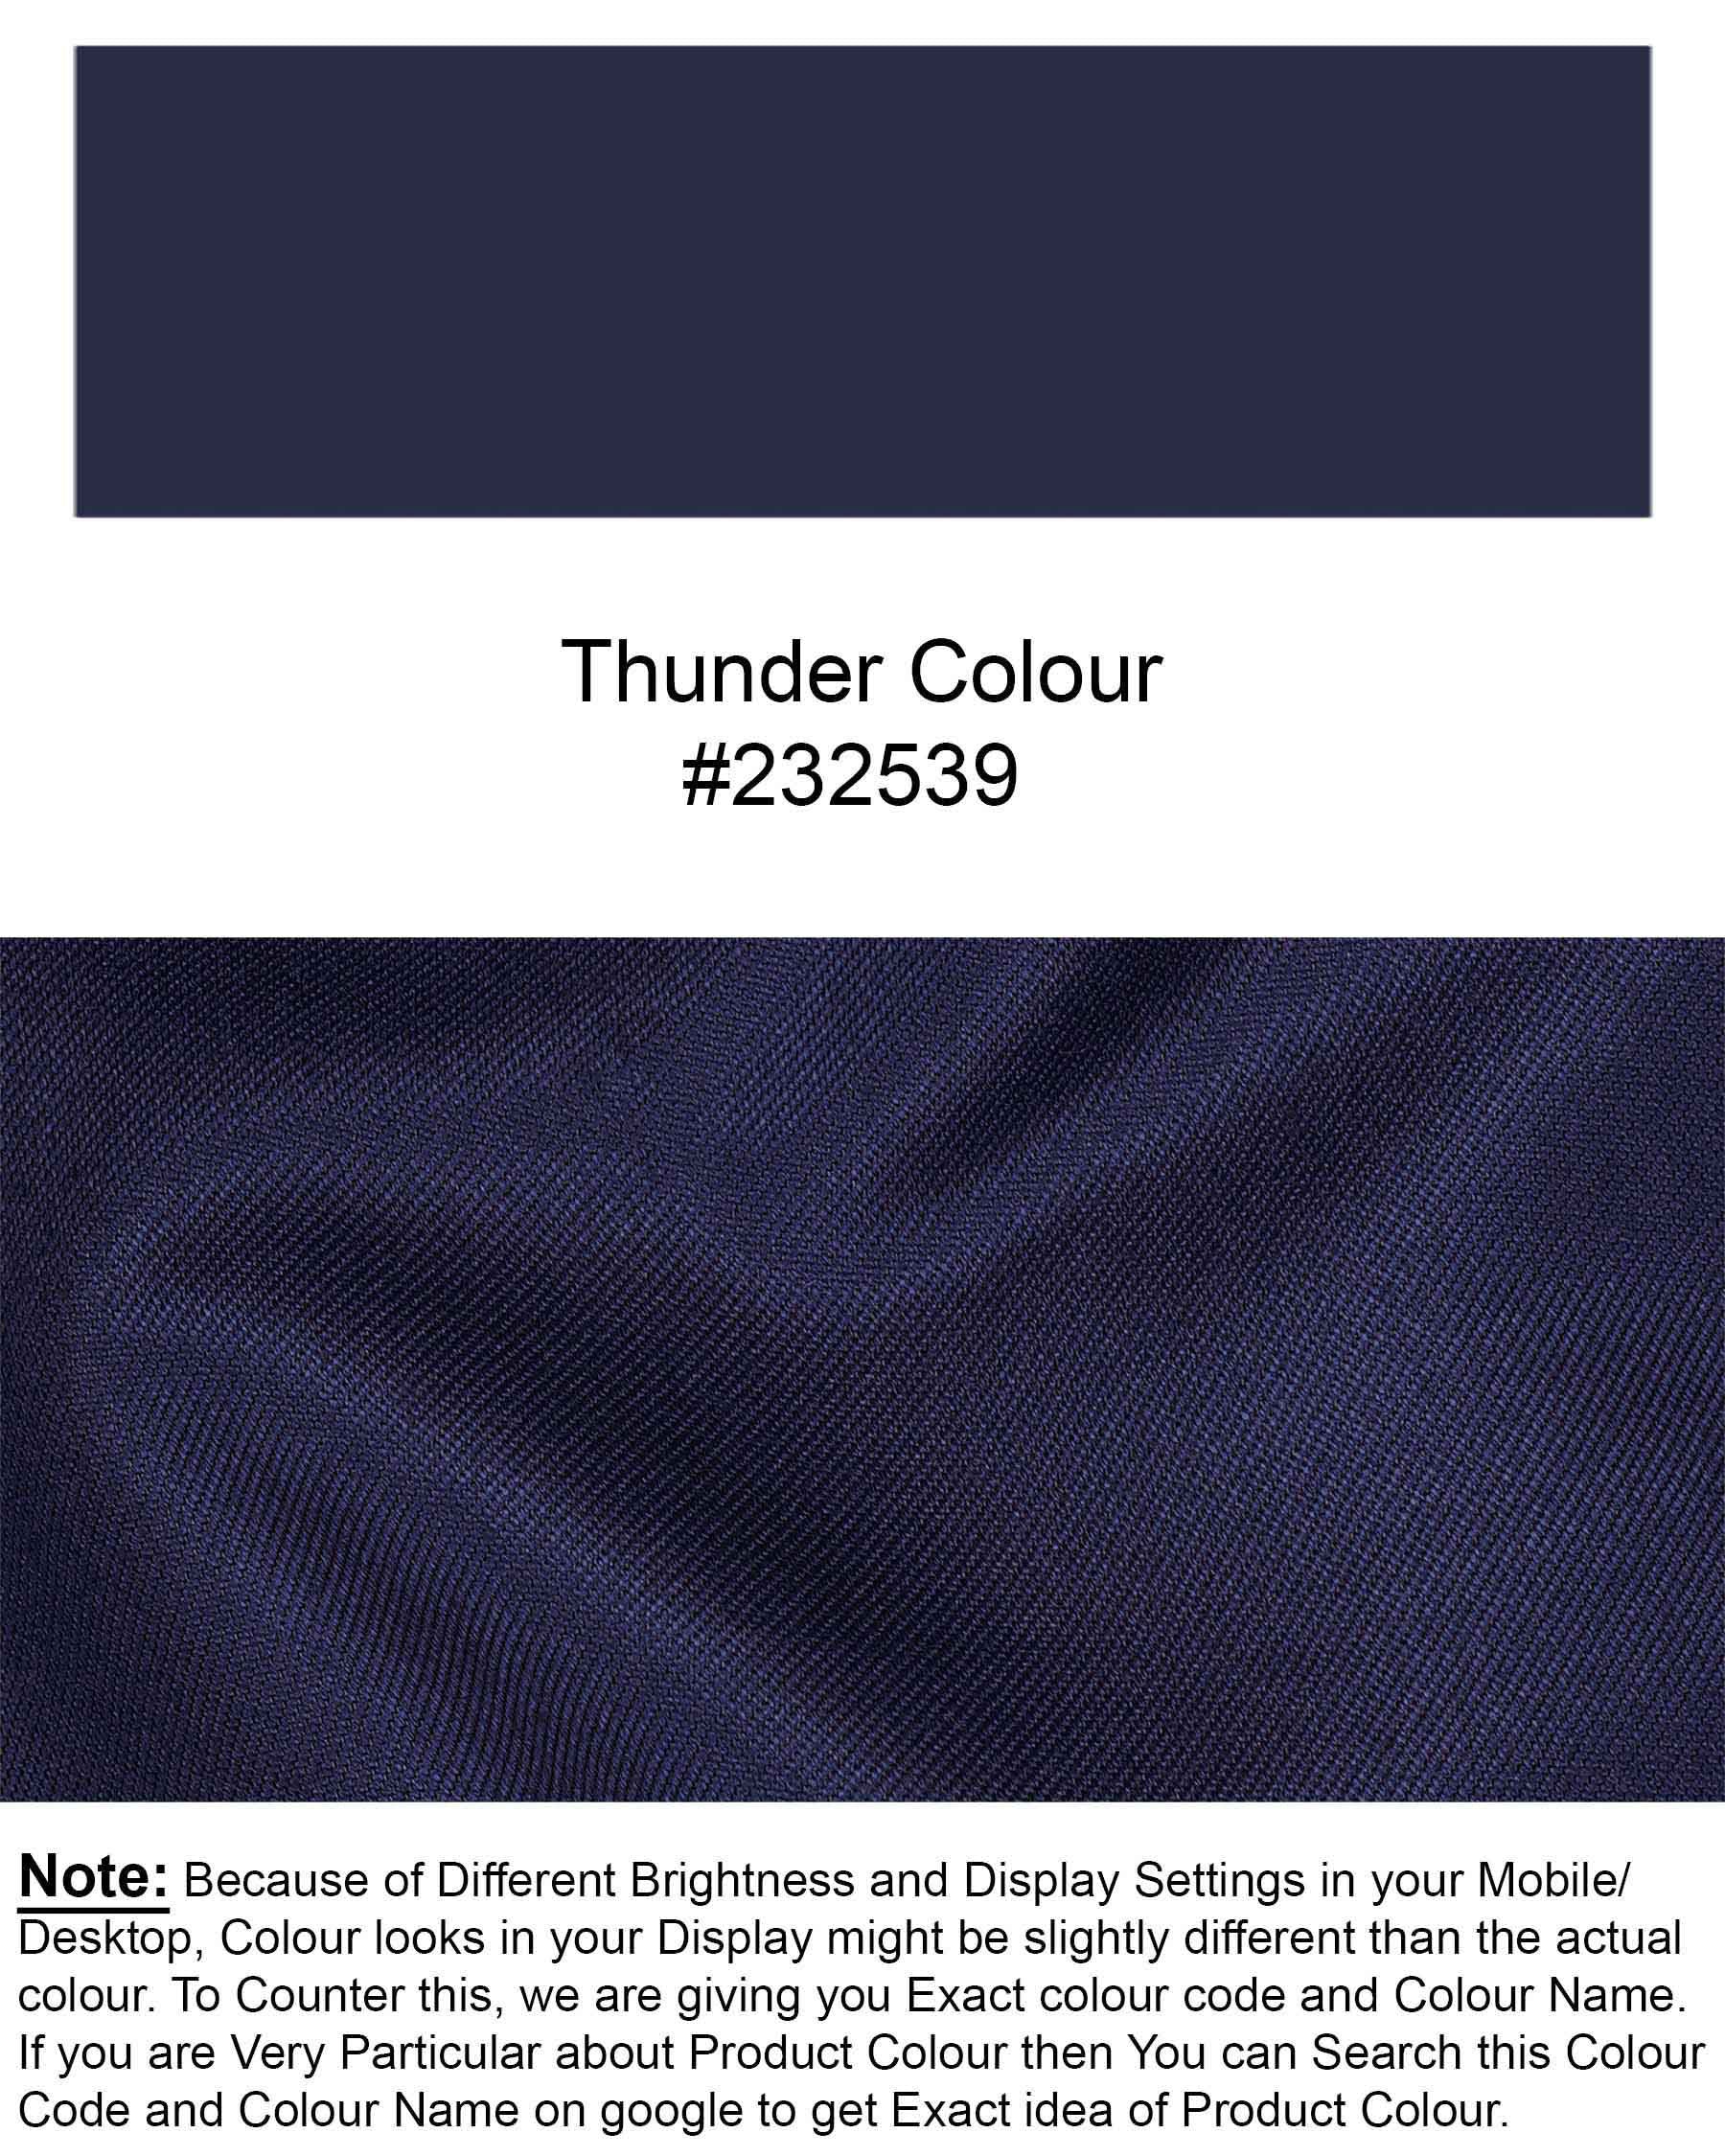 Thunder Blue Double Breasted Sports Blazer BL1907-DB-PP-36,BL1907-DB-PP-38,BL1907-DB-PP-40,BL1907-DB-PP-42,BL1907-DB-PP-44,BL1907-DB-PP-46,BL1907-DB-PP-48,BL1907-DB-PP-50,BL1907-DB-PP-52,BL1907-DB-PP-54,BL1907-DB-PP-56,BL1907-DB-PP-58,BL1907-DB-PP-60 